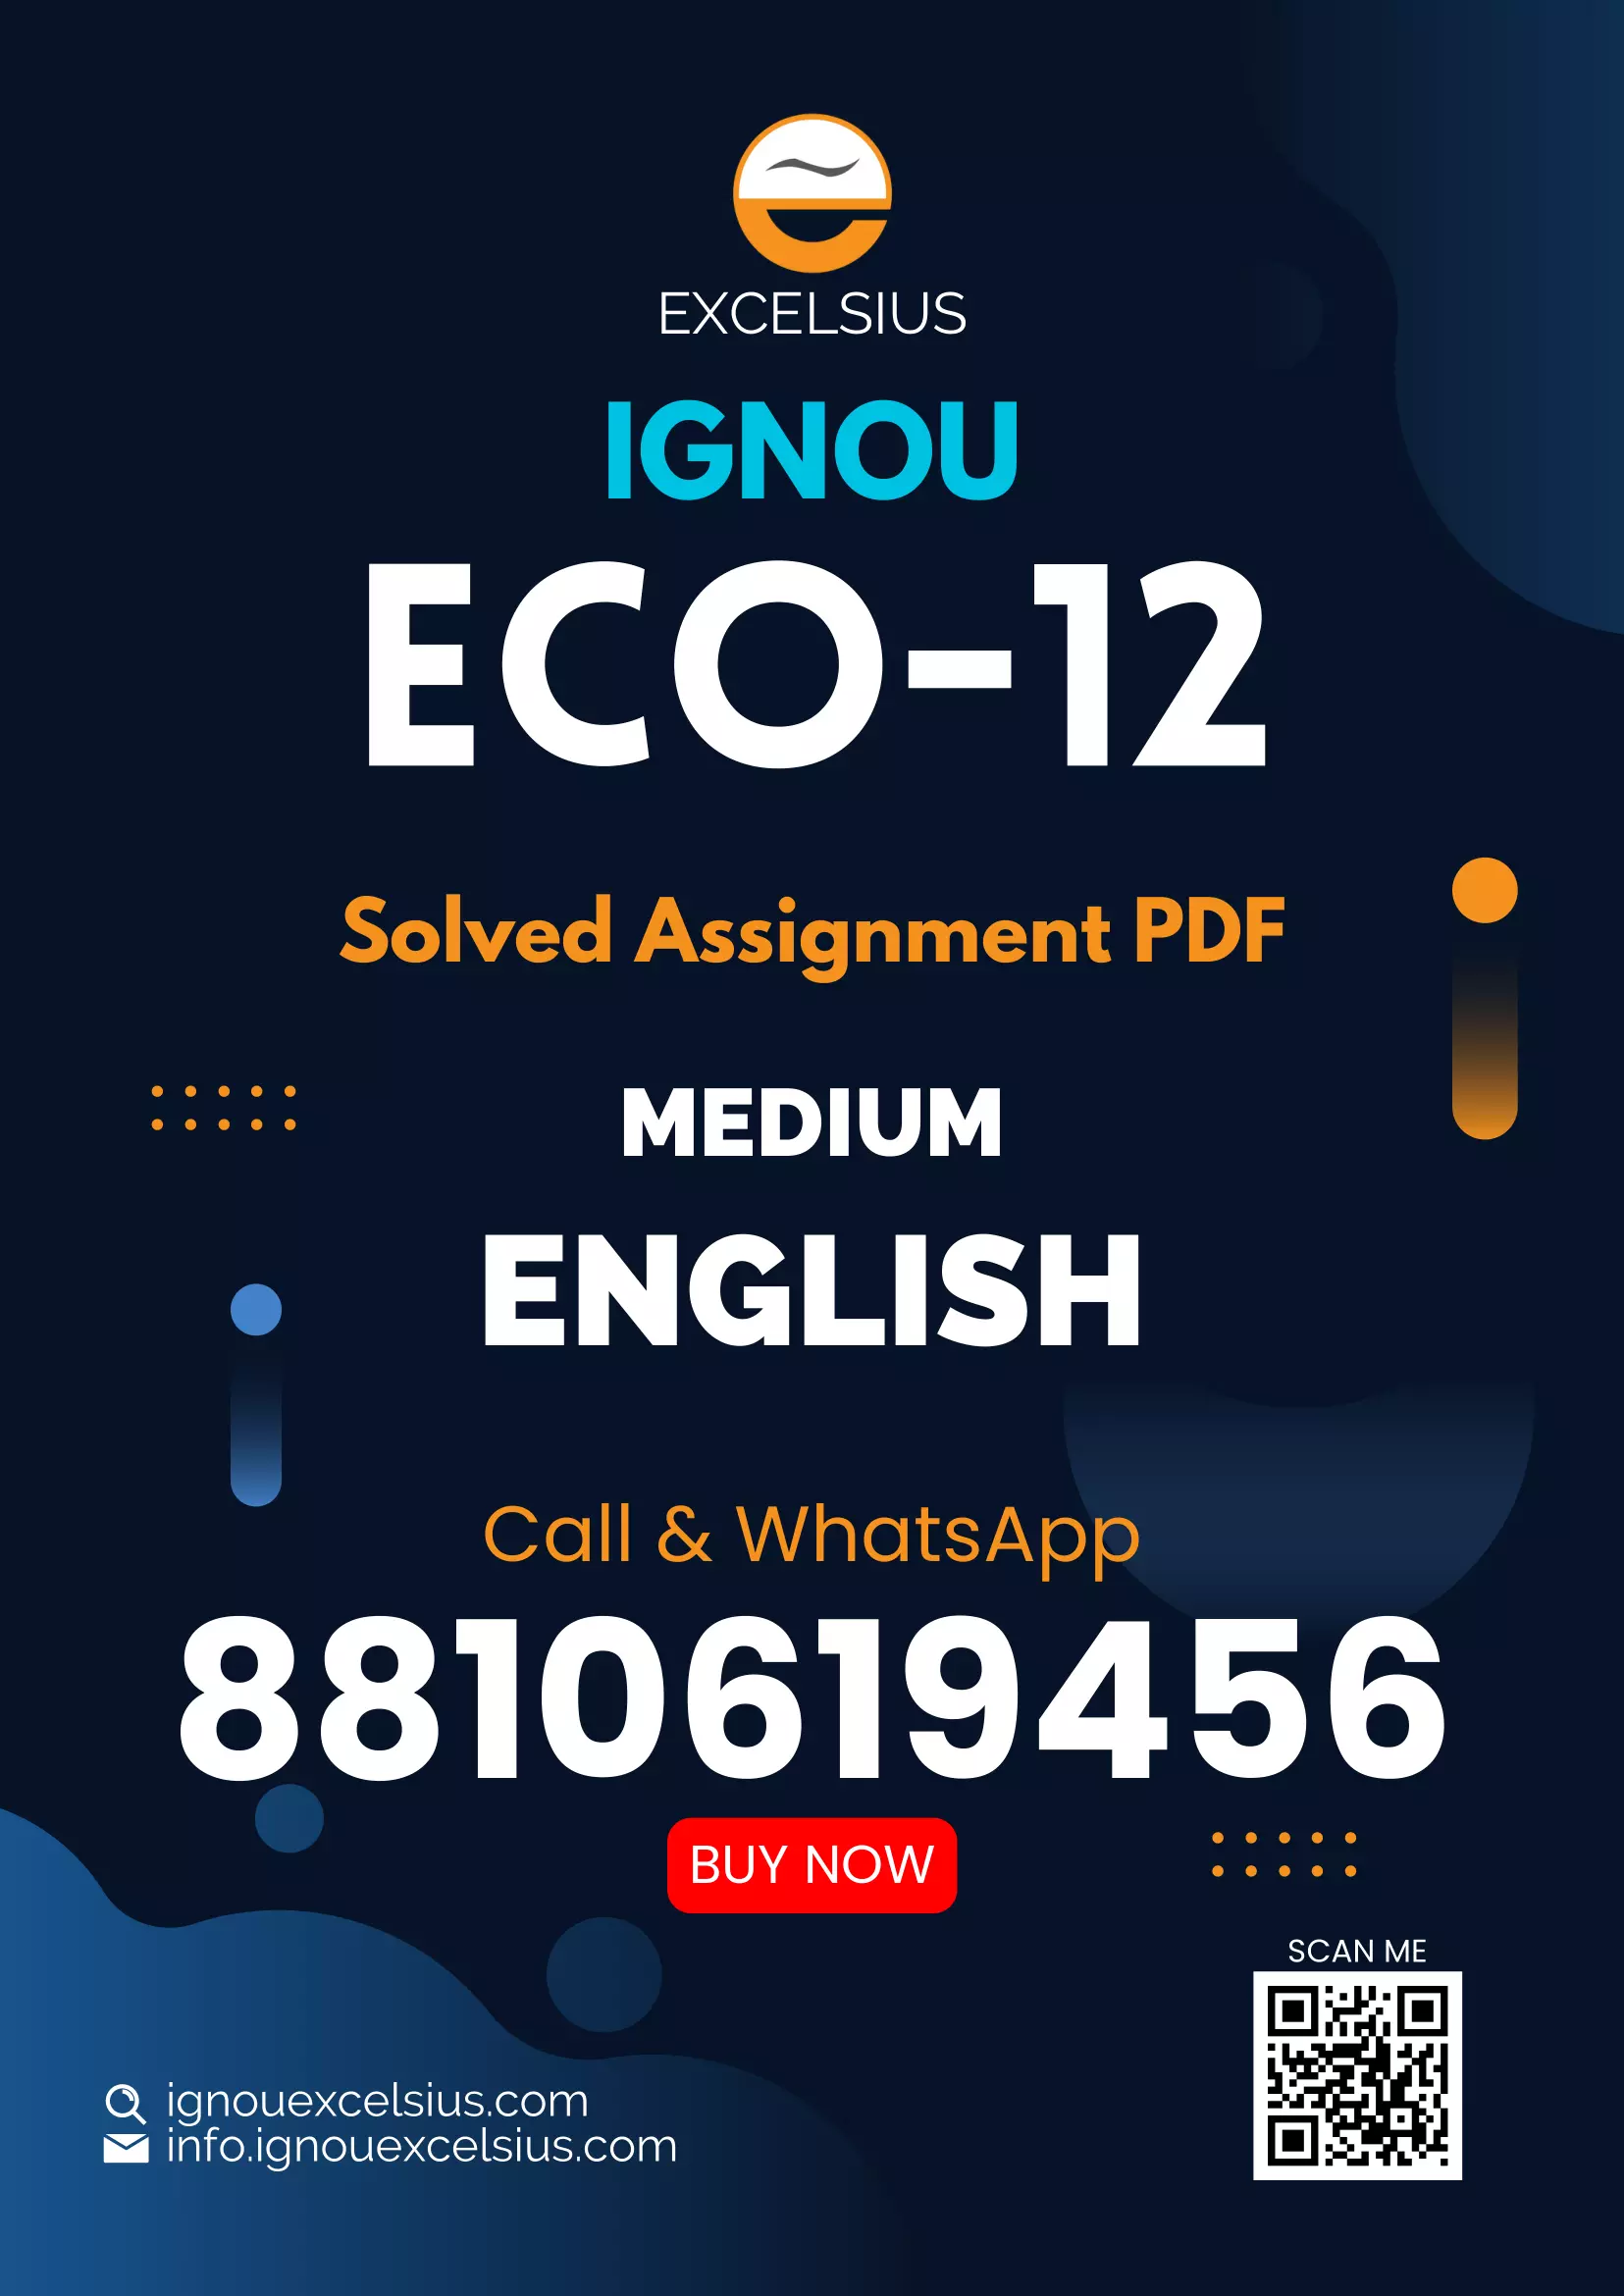 IGNOU ECO-12 - Elements of Auditing, Latest Solved Assignment-July 2022 – January 2023